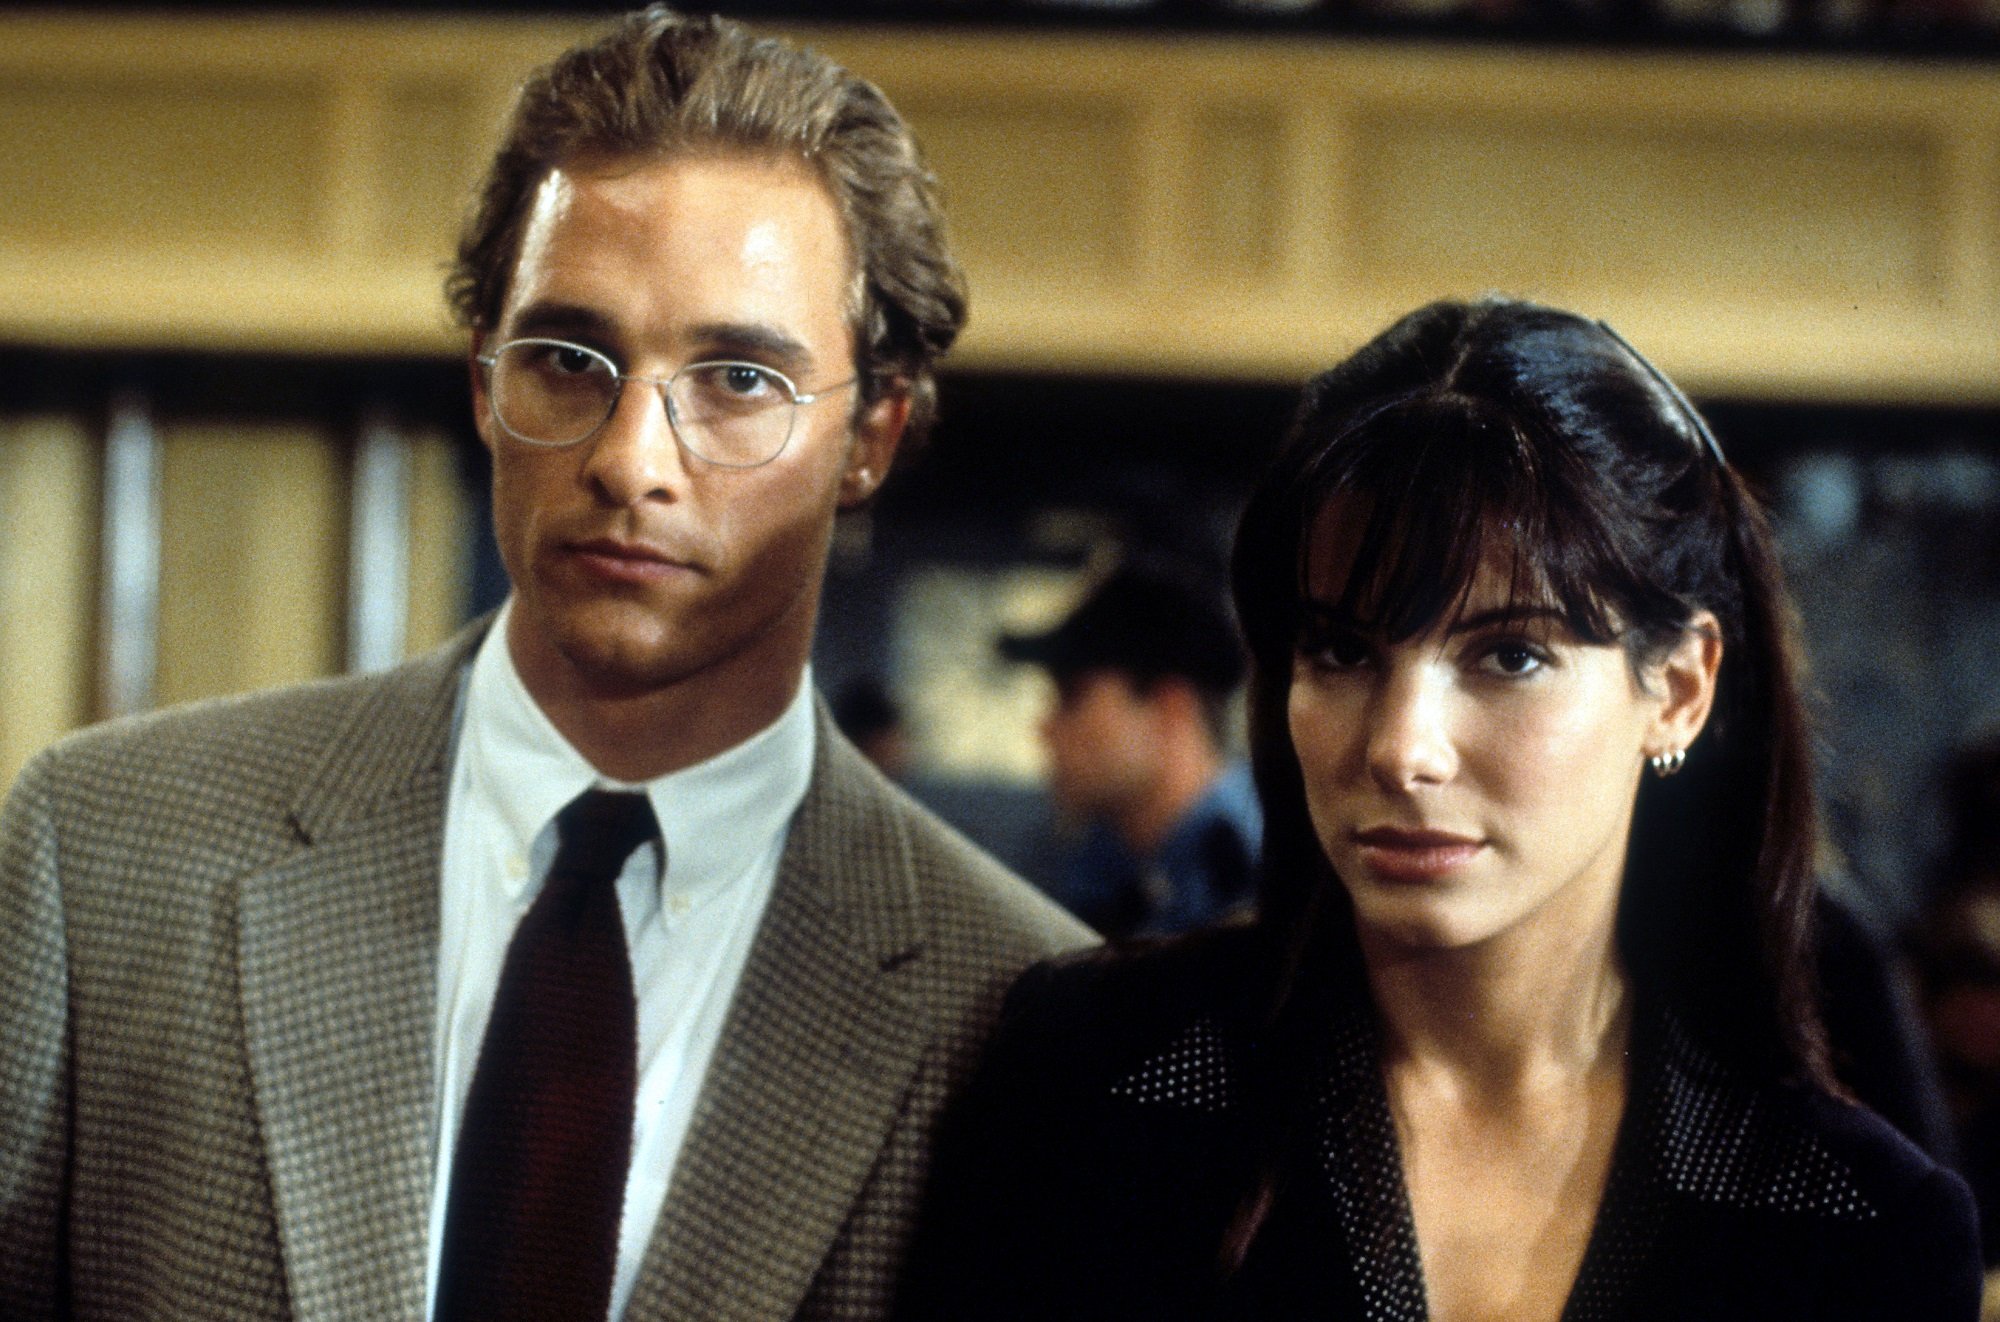 Matthew McConaughey and Sandra Bullock in the courtroom in A Time to Kill